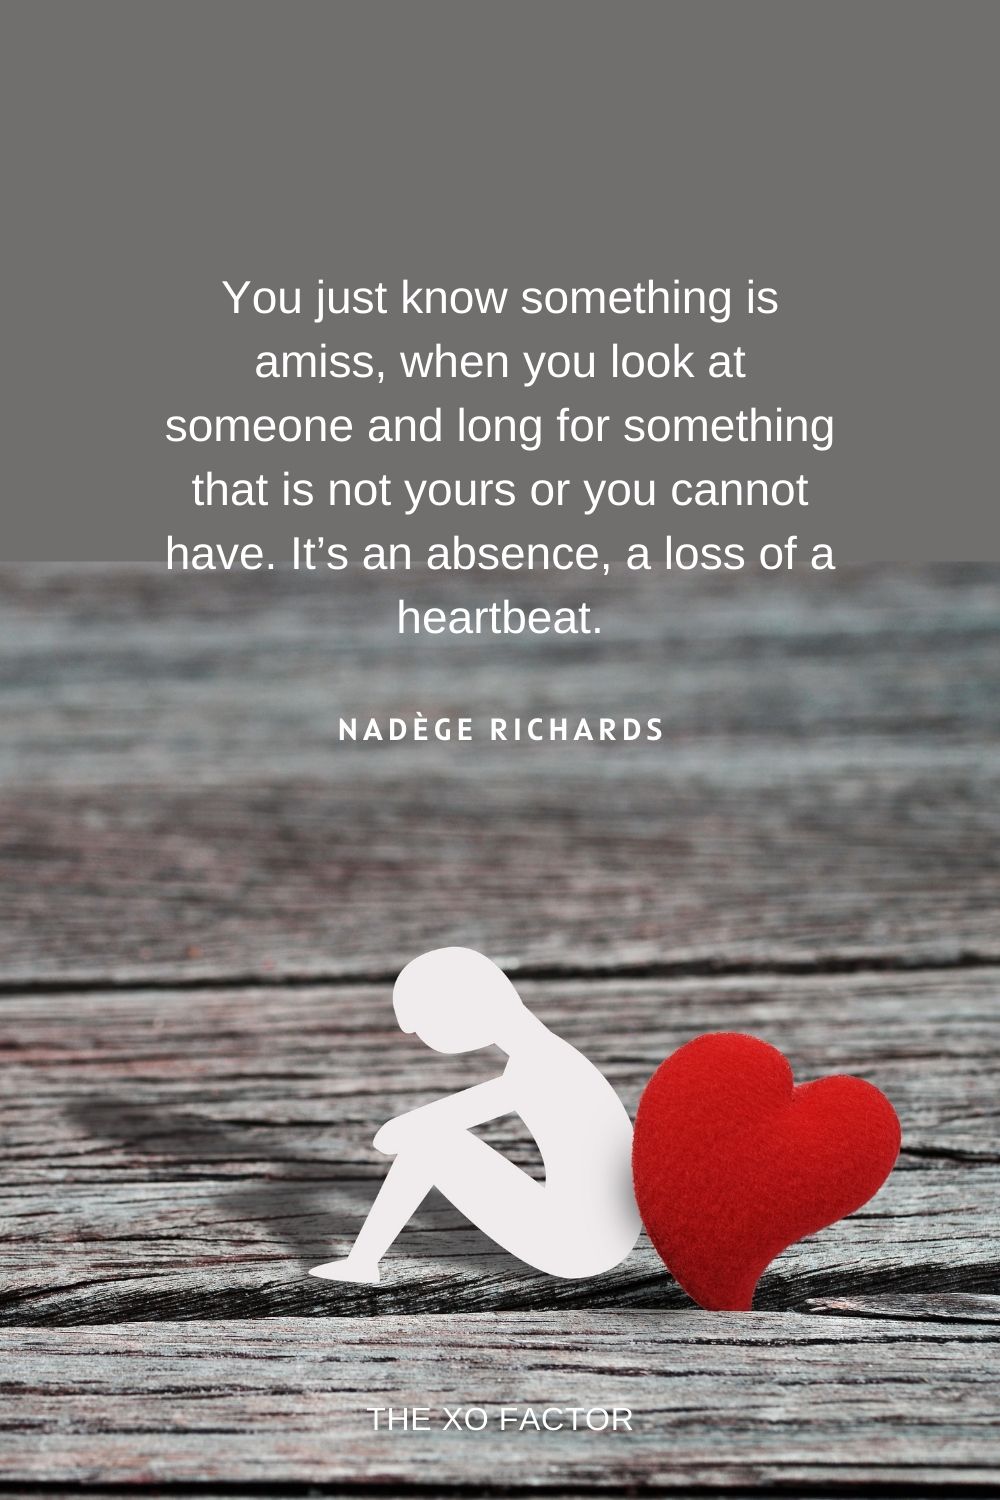 You just know something is amiss, when you look at someone and long for something that is not yours or you cannot have. It’s an absence–a loss of a heartbeat. Nadège Richards